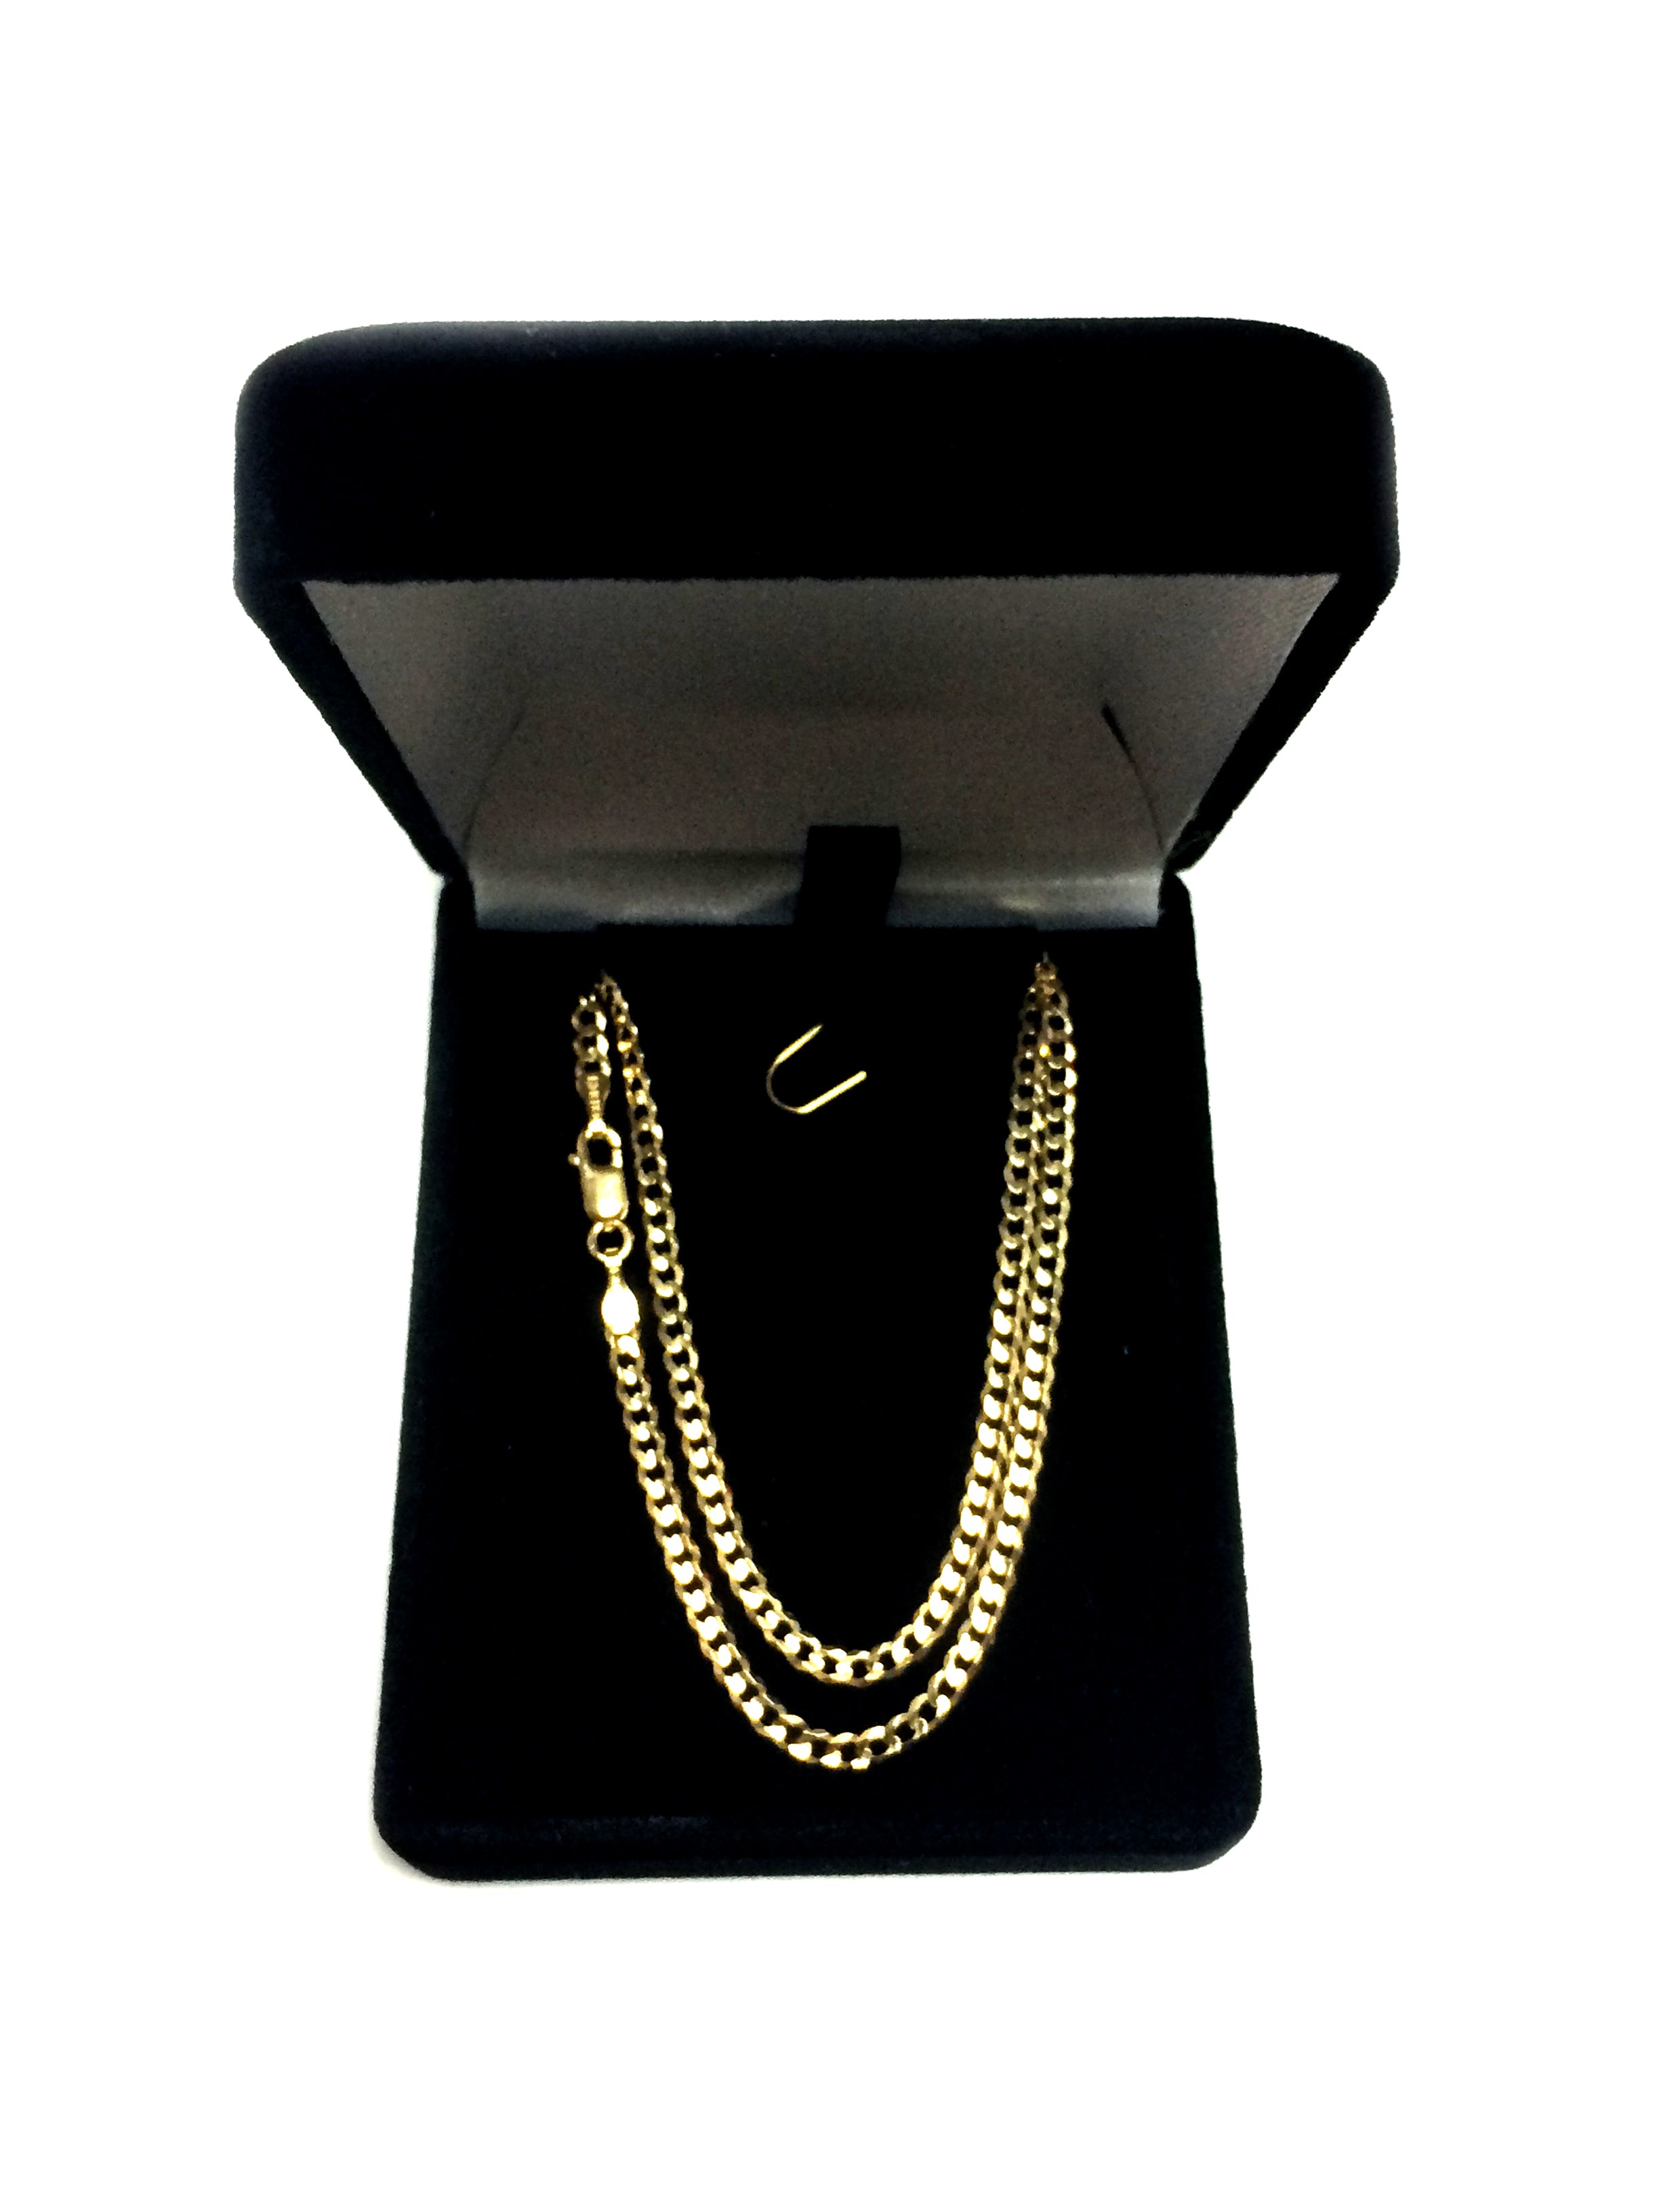 14k Yellow Gold Comfort Curb Chain Necklace, 2.7mm fine designer jewelry for men and women